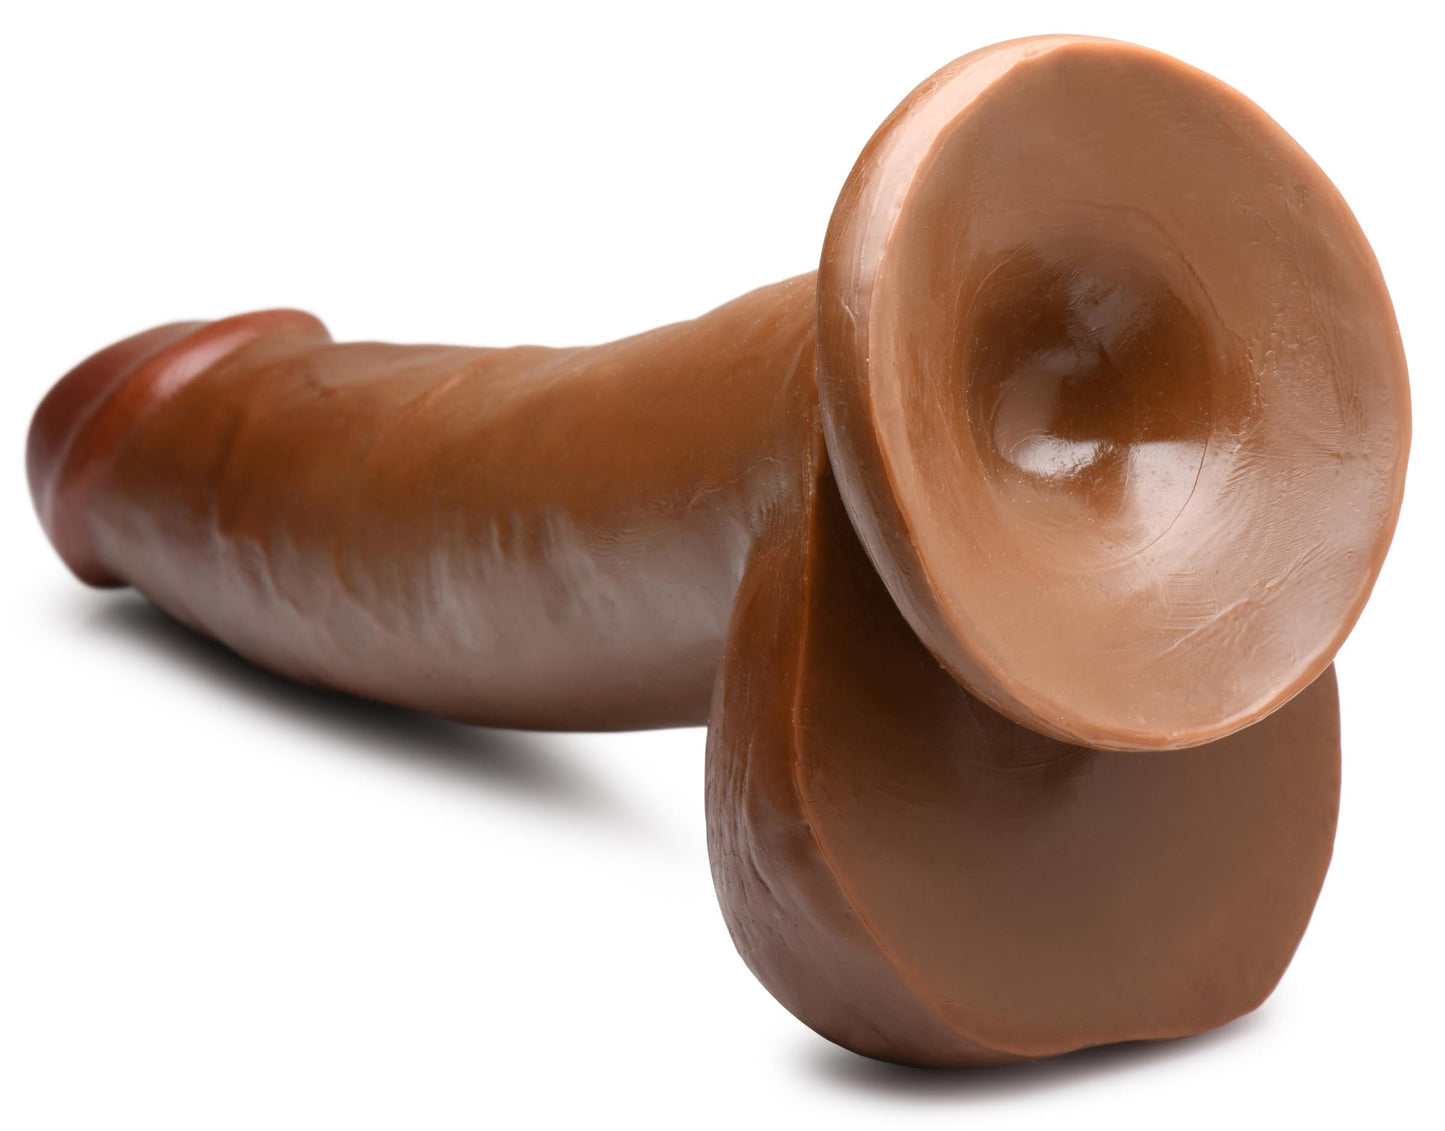 JOCK 8 Inch Dong with Balls Brown - UABDSM